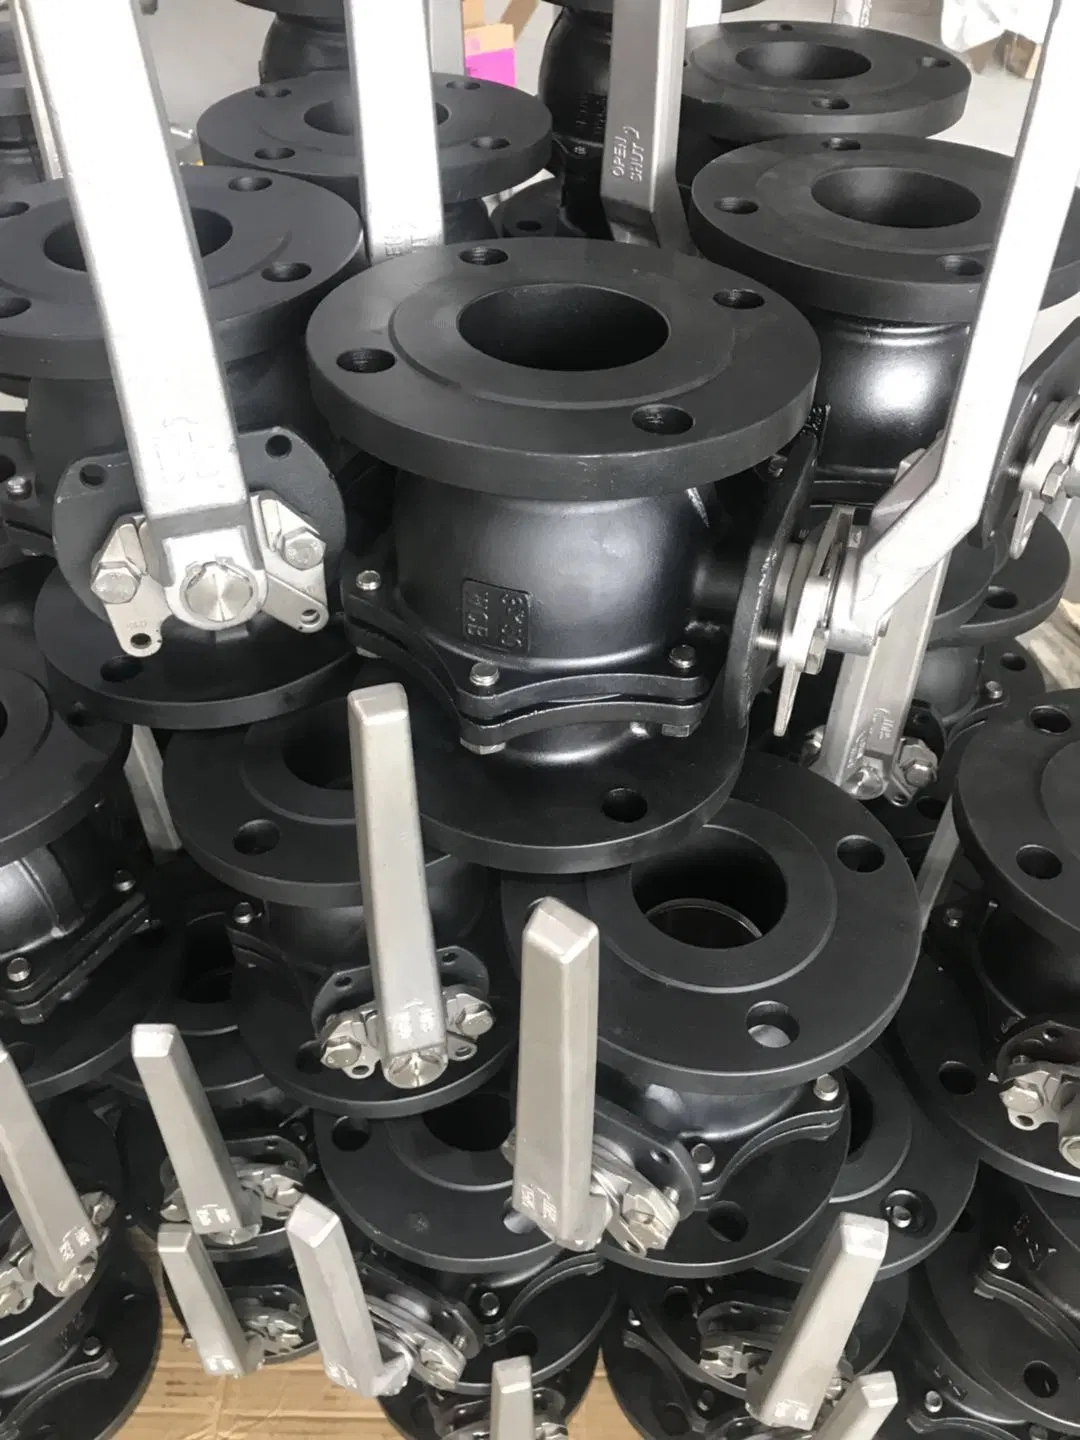 Wcb, Brass, Cast Iron or Forged Stainless Steel Carbon Steel Pneumatic Industrial Floating Female Threaded 3PC Ball Valve with T 1000wog Carbon Steel Ball Valve